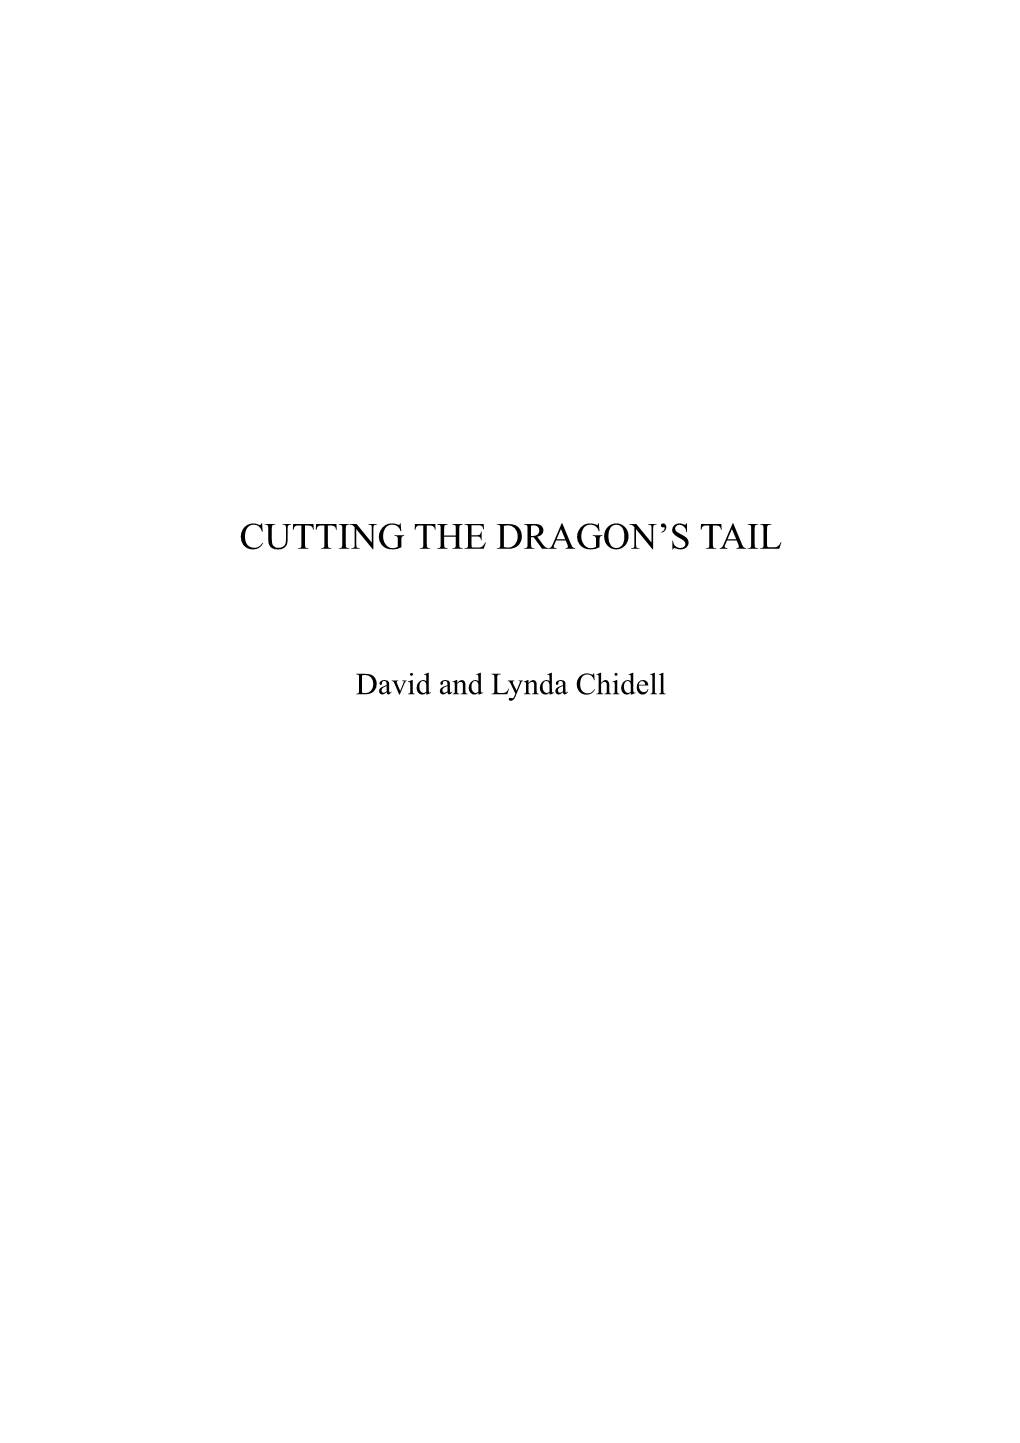 Cutting the Dragon's Tail